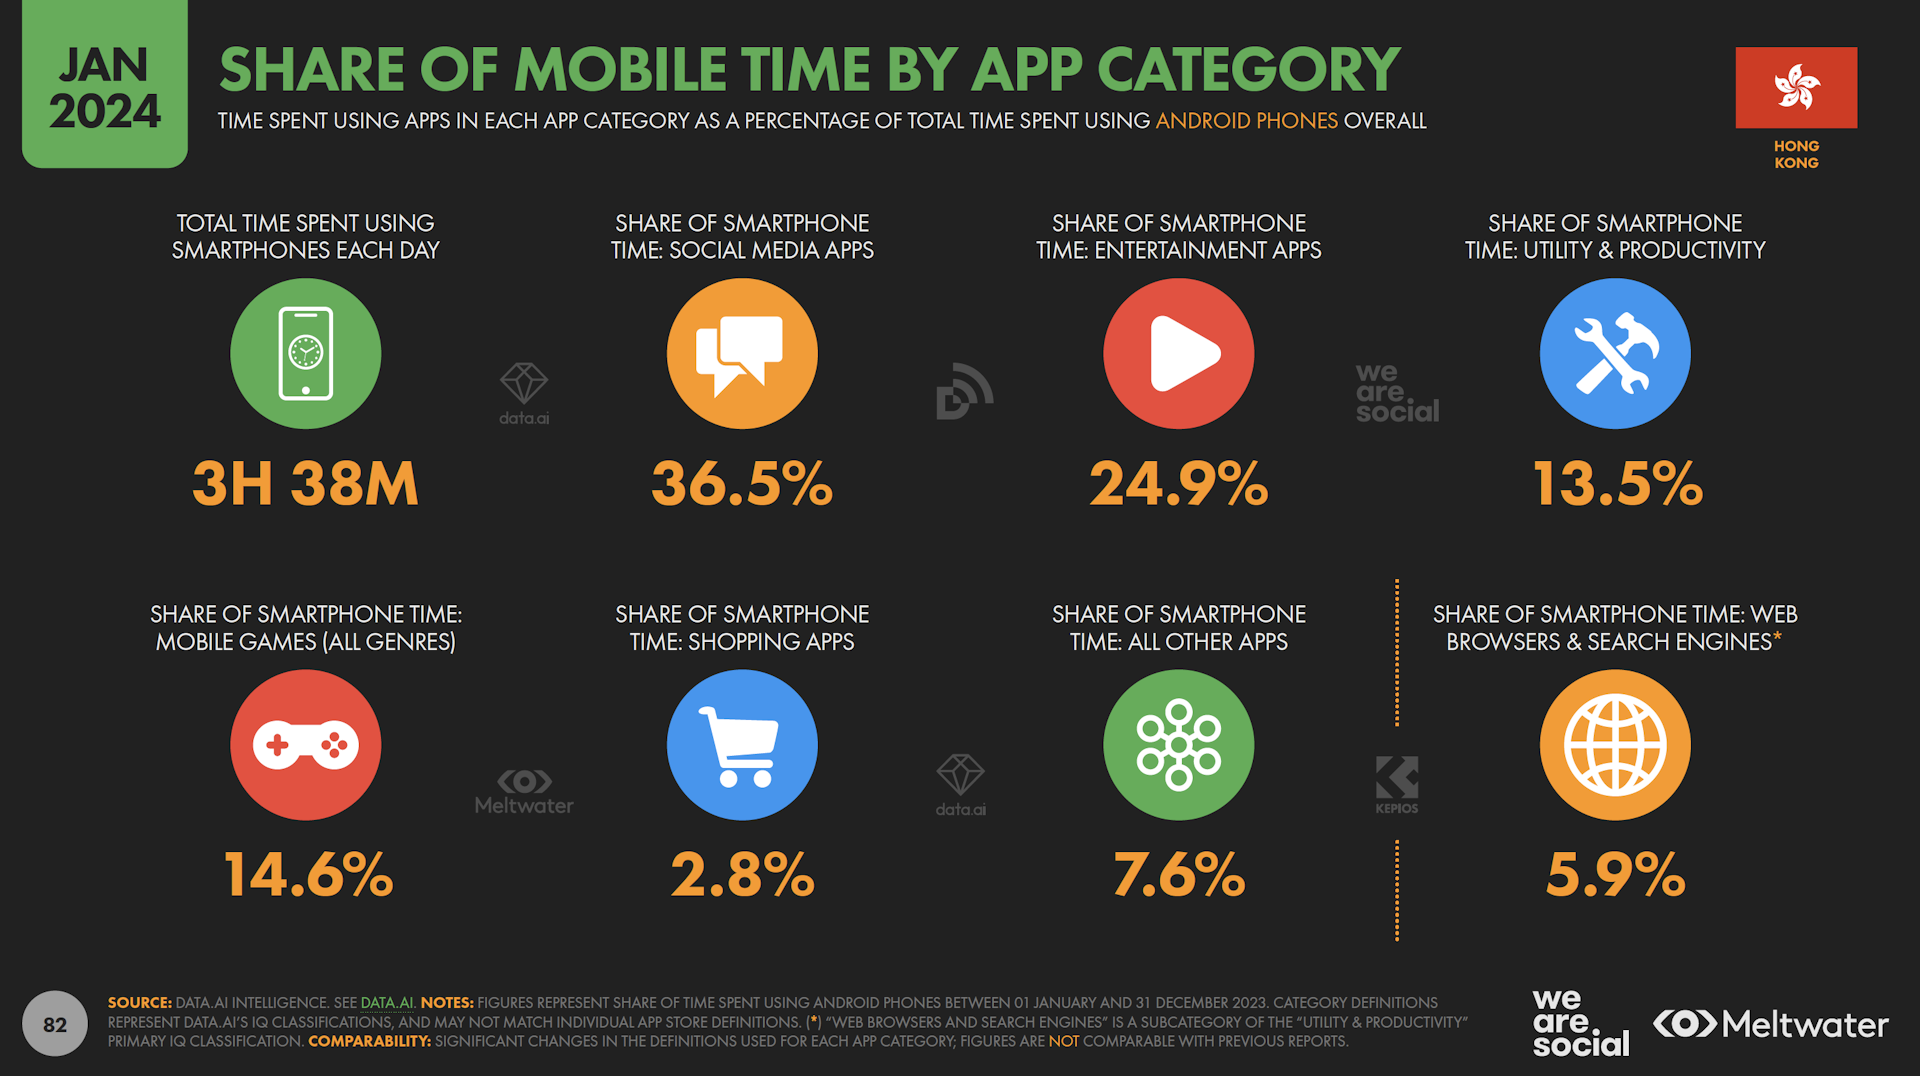 Share of mobile time by app category based on Global Digital Report 2024 for Hong Kong